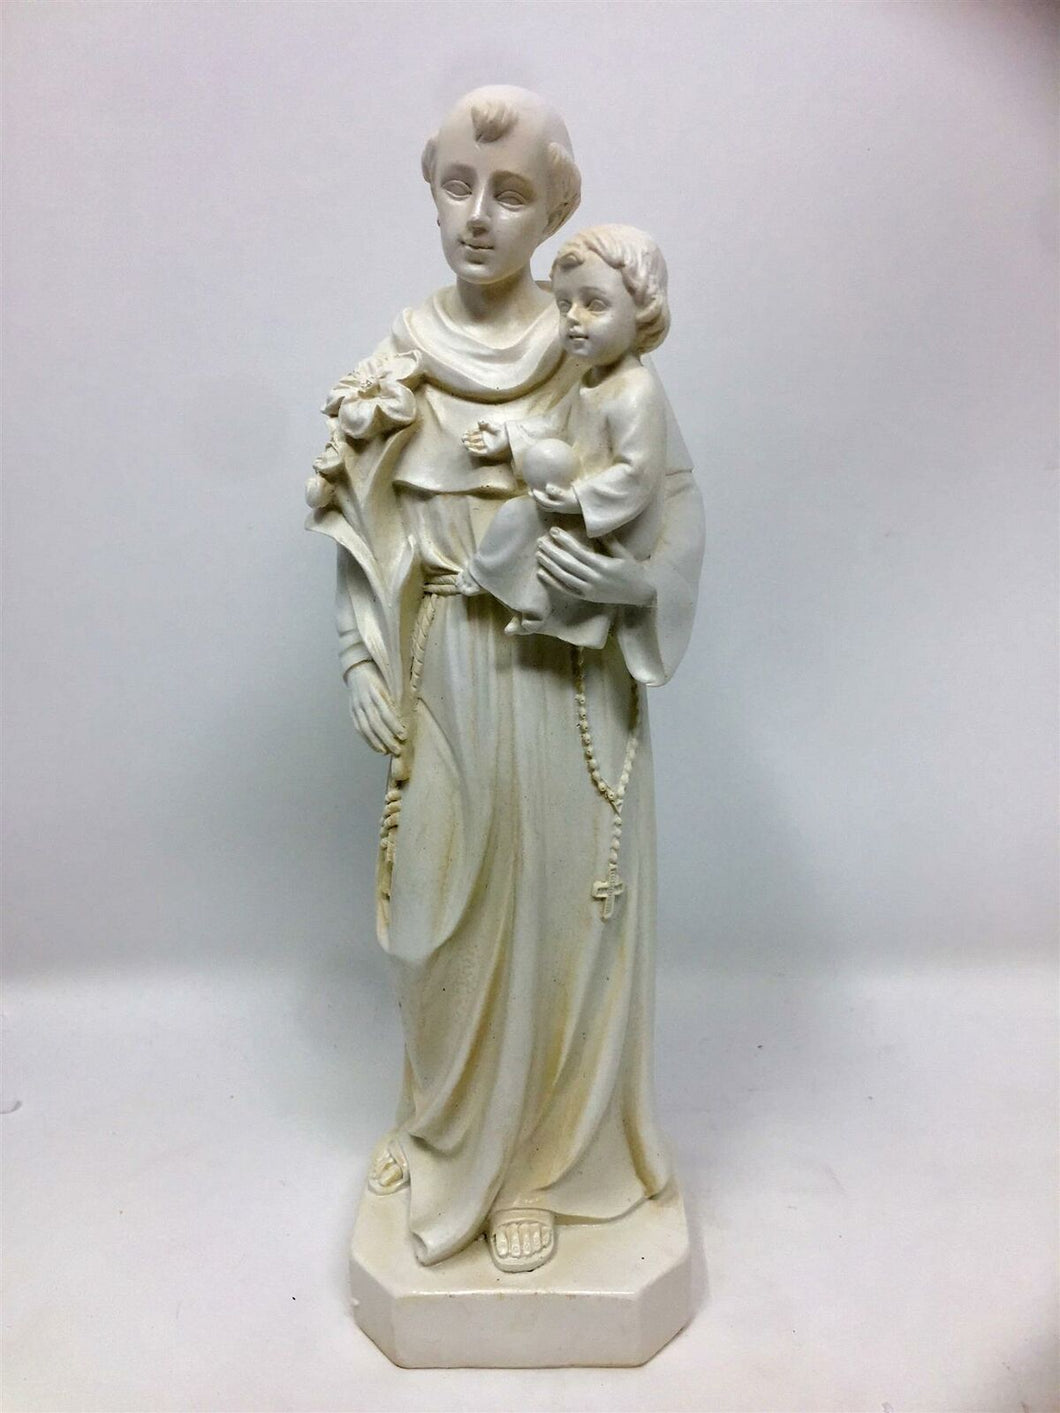 St Anthony with Baby Jesus Statue Religious Ornament Sculpture Catholic Figure